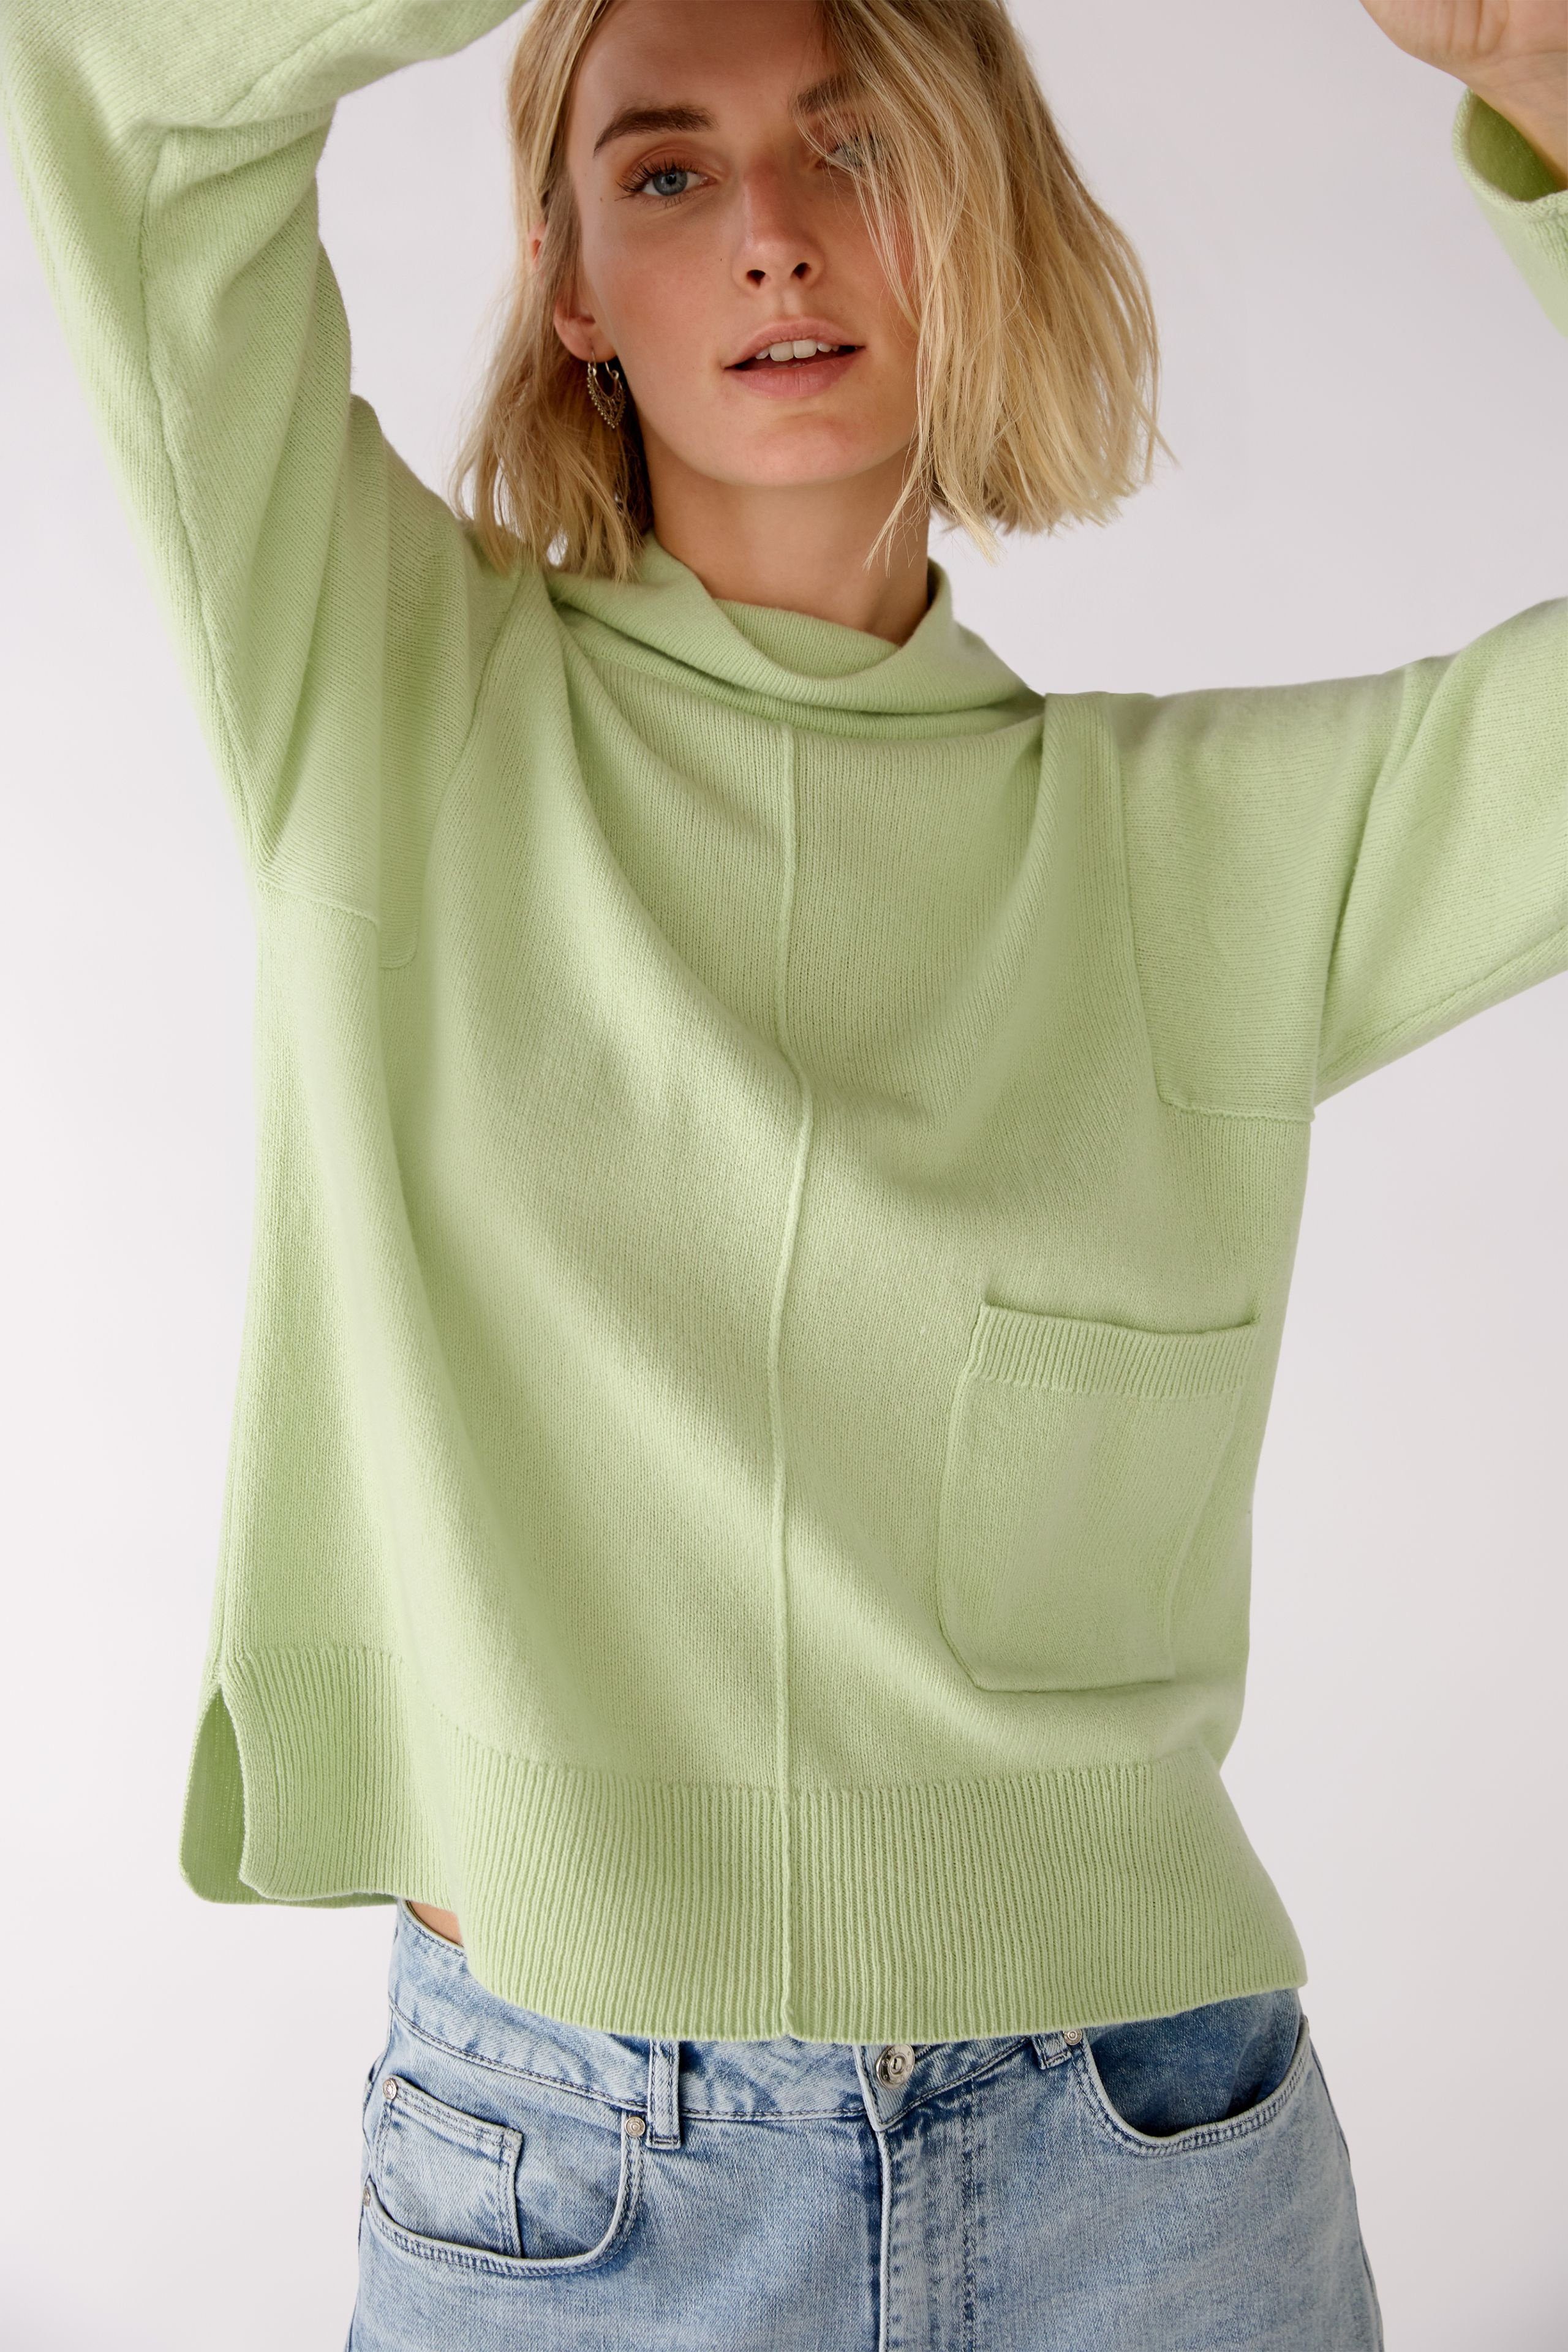 Oui Strickpullover in Strickpullover light green Wollmischung